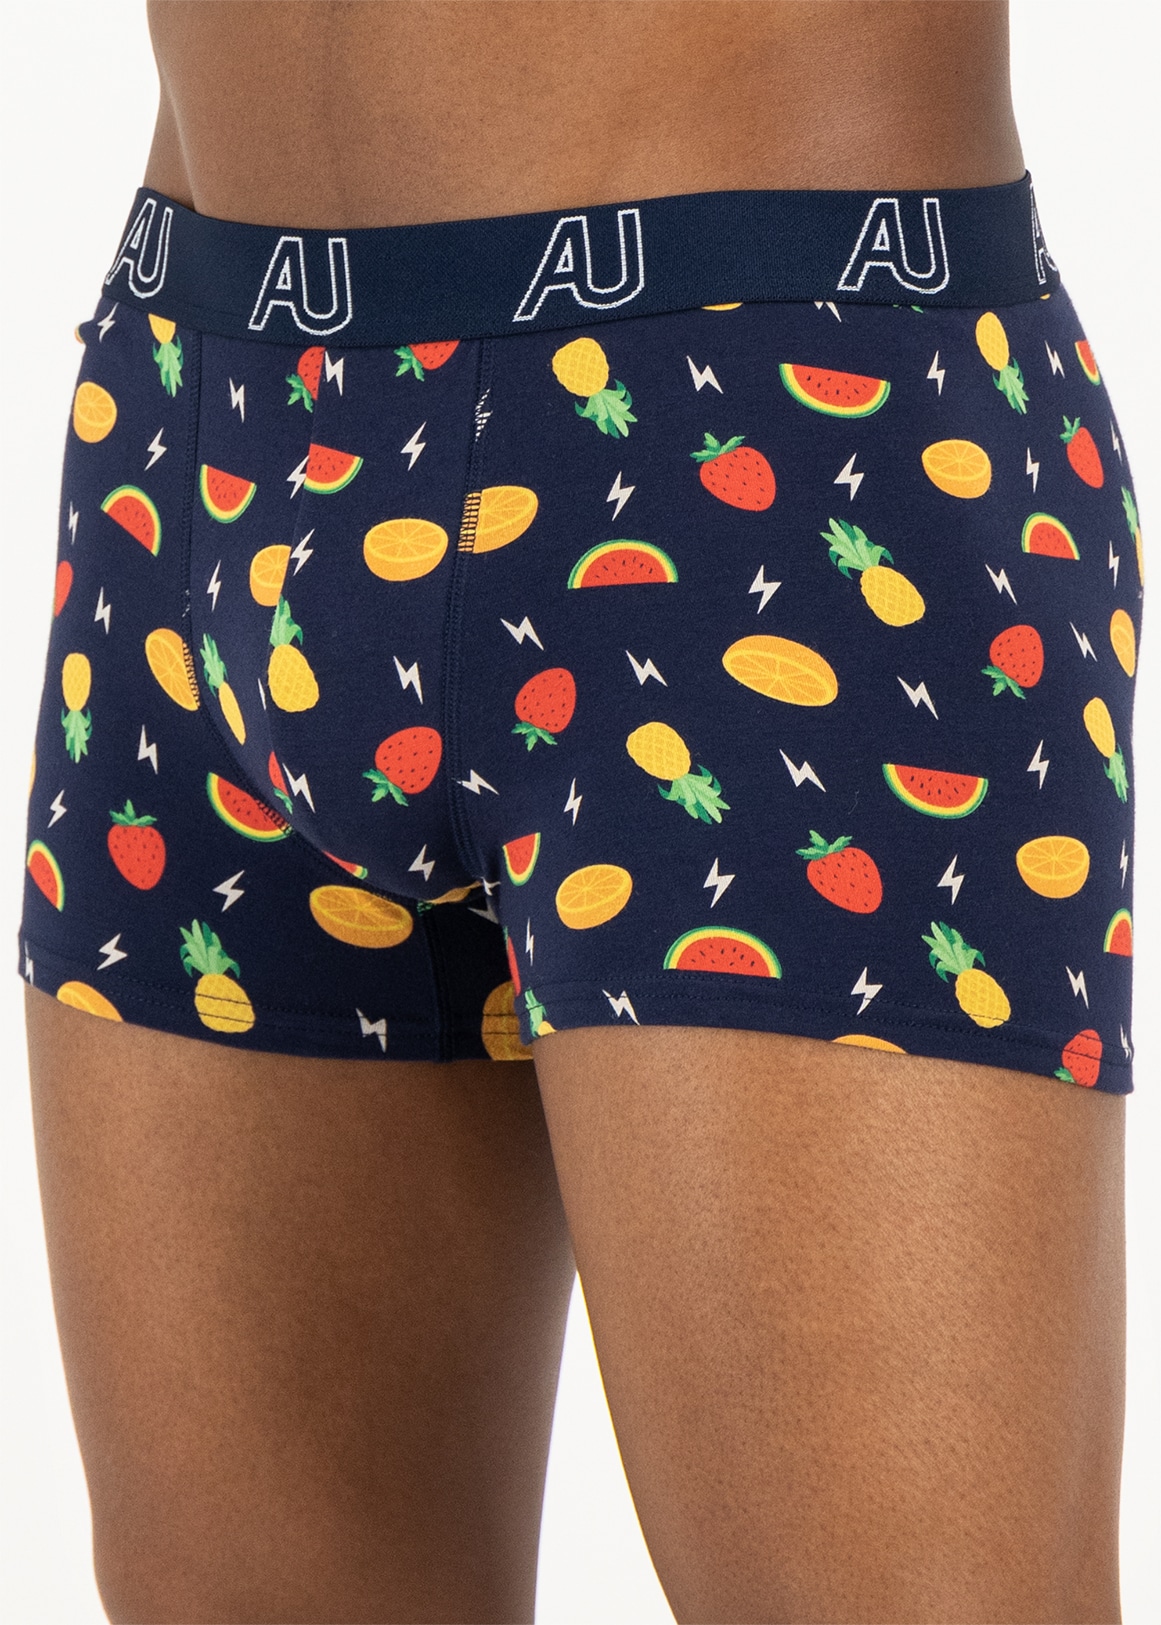 AW22 SINGLE FRUIT - Woolworths Mauritius Online